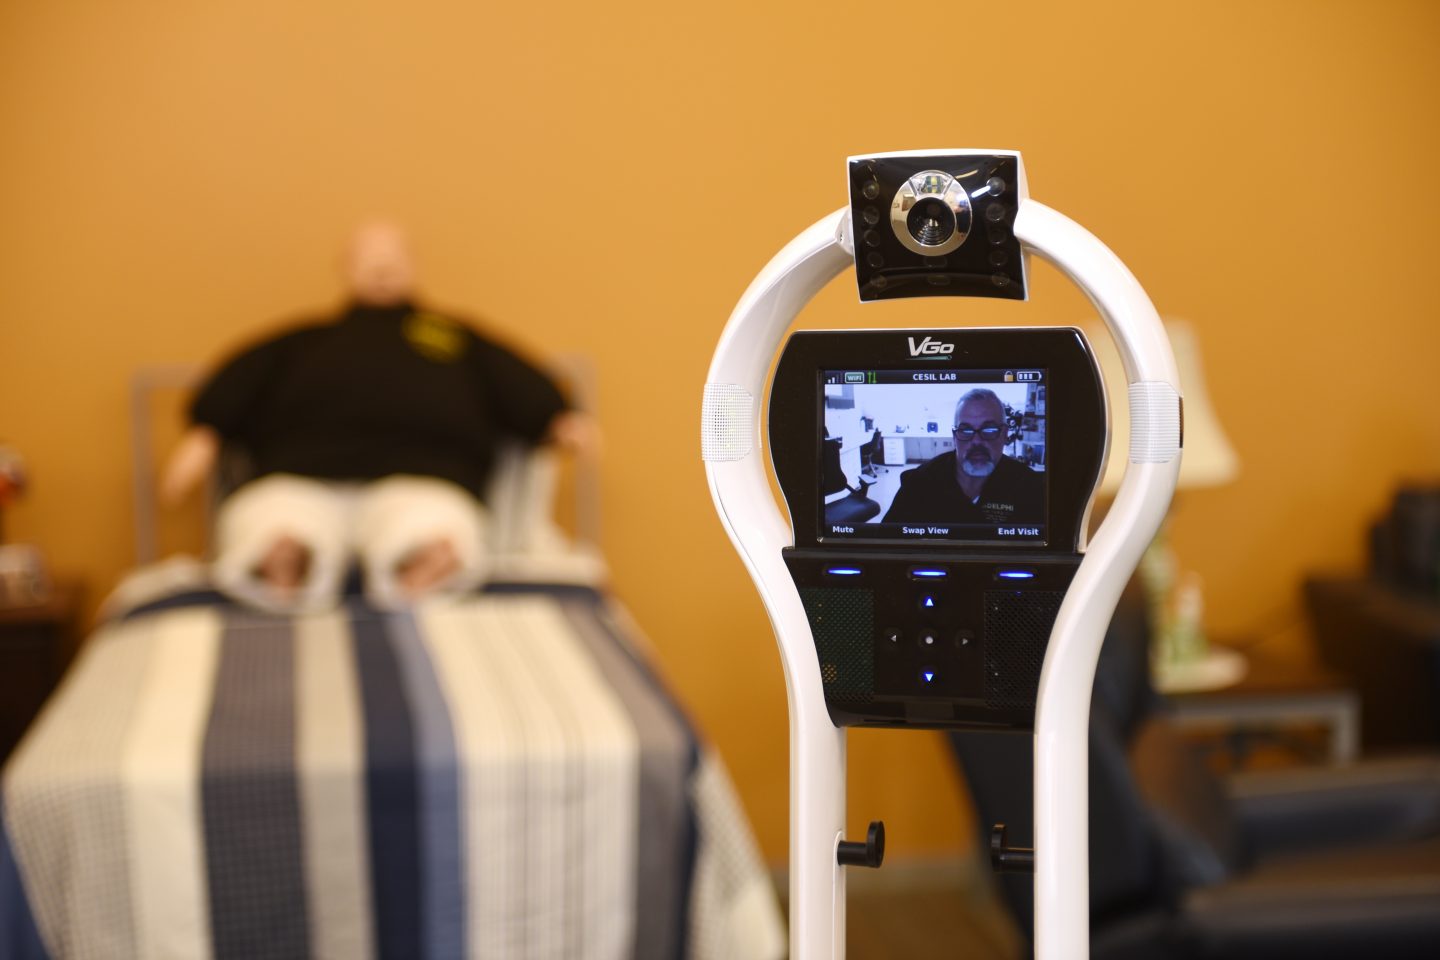 Telepresence robots like this one are used for remote monitoring in CESiL鈥檚 home-care suite as well as in the growing home healthcare field. They enhance both nursing and healthcare informatics students鈥� educational experience.